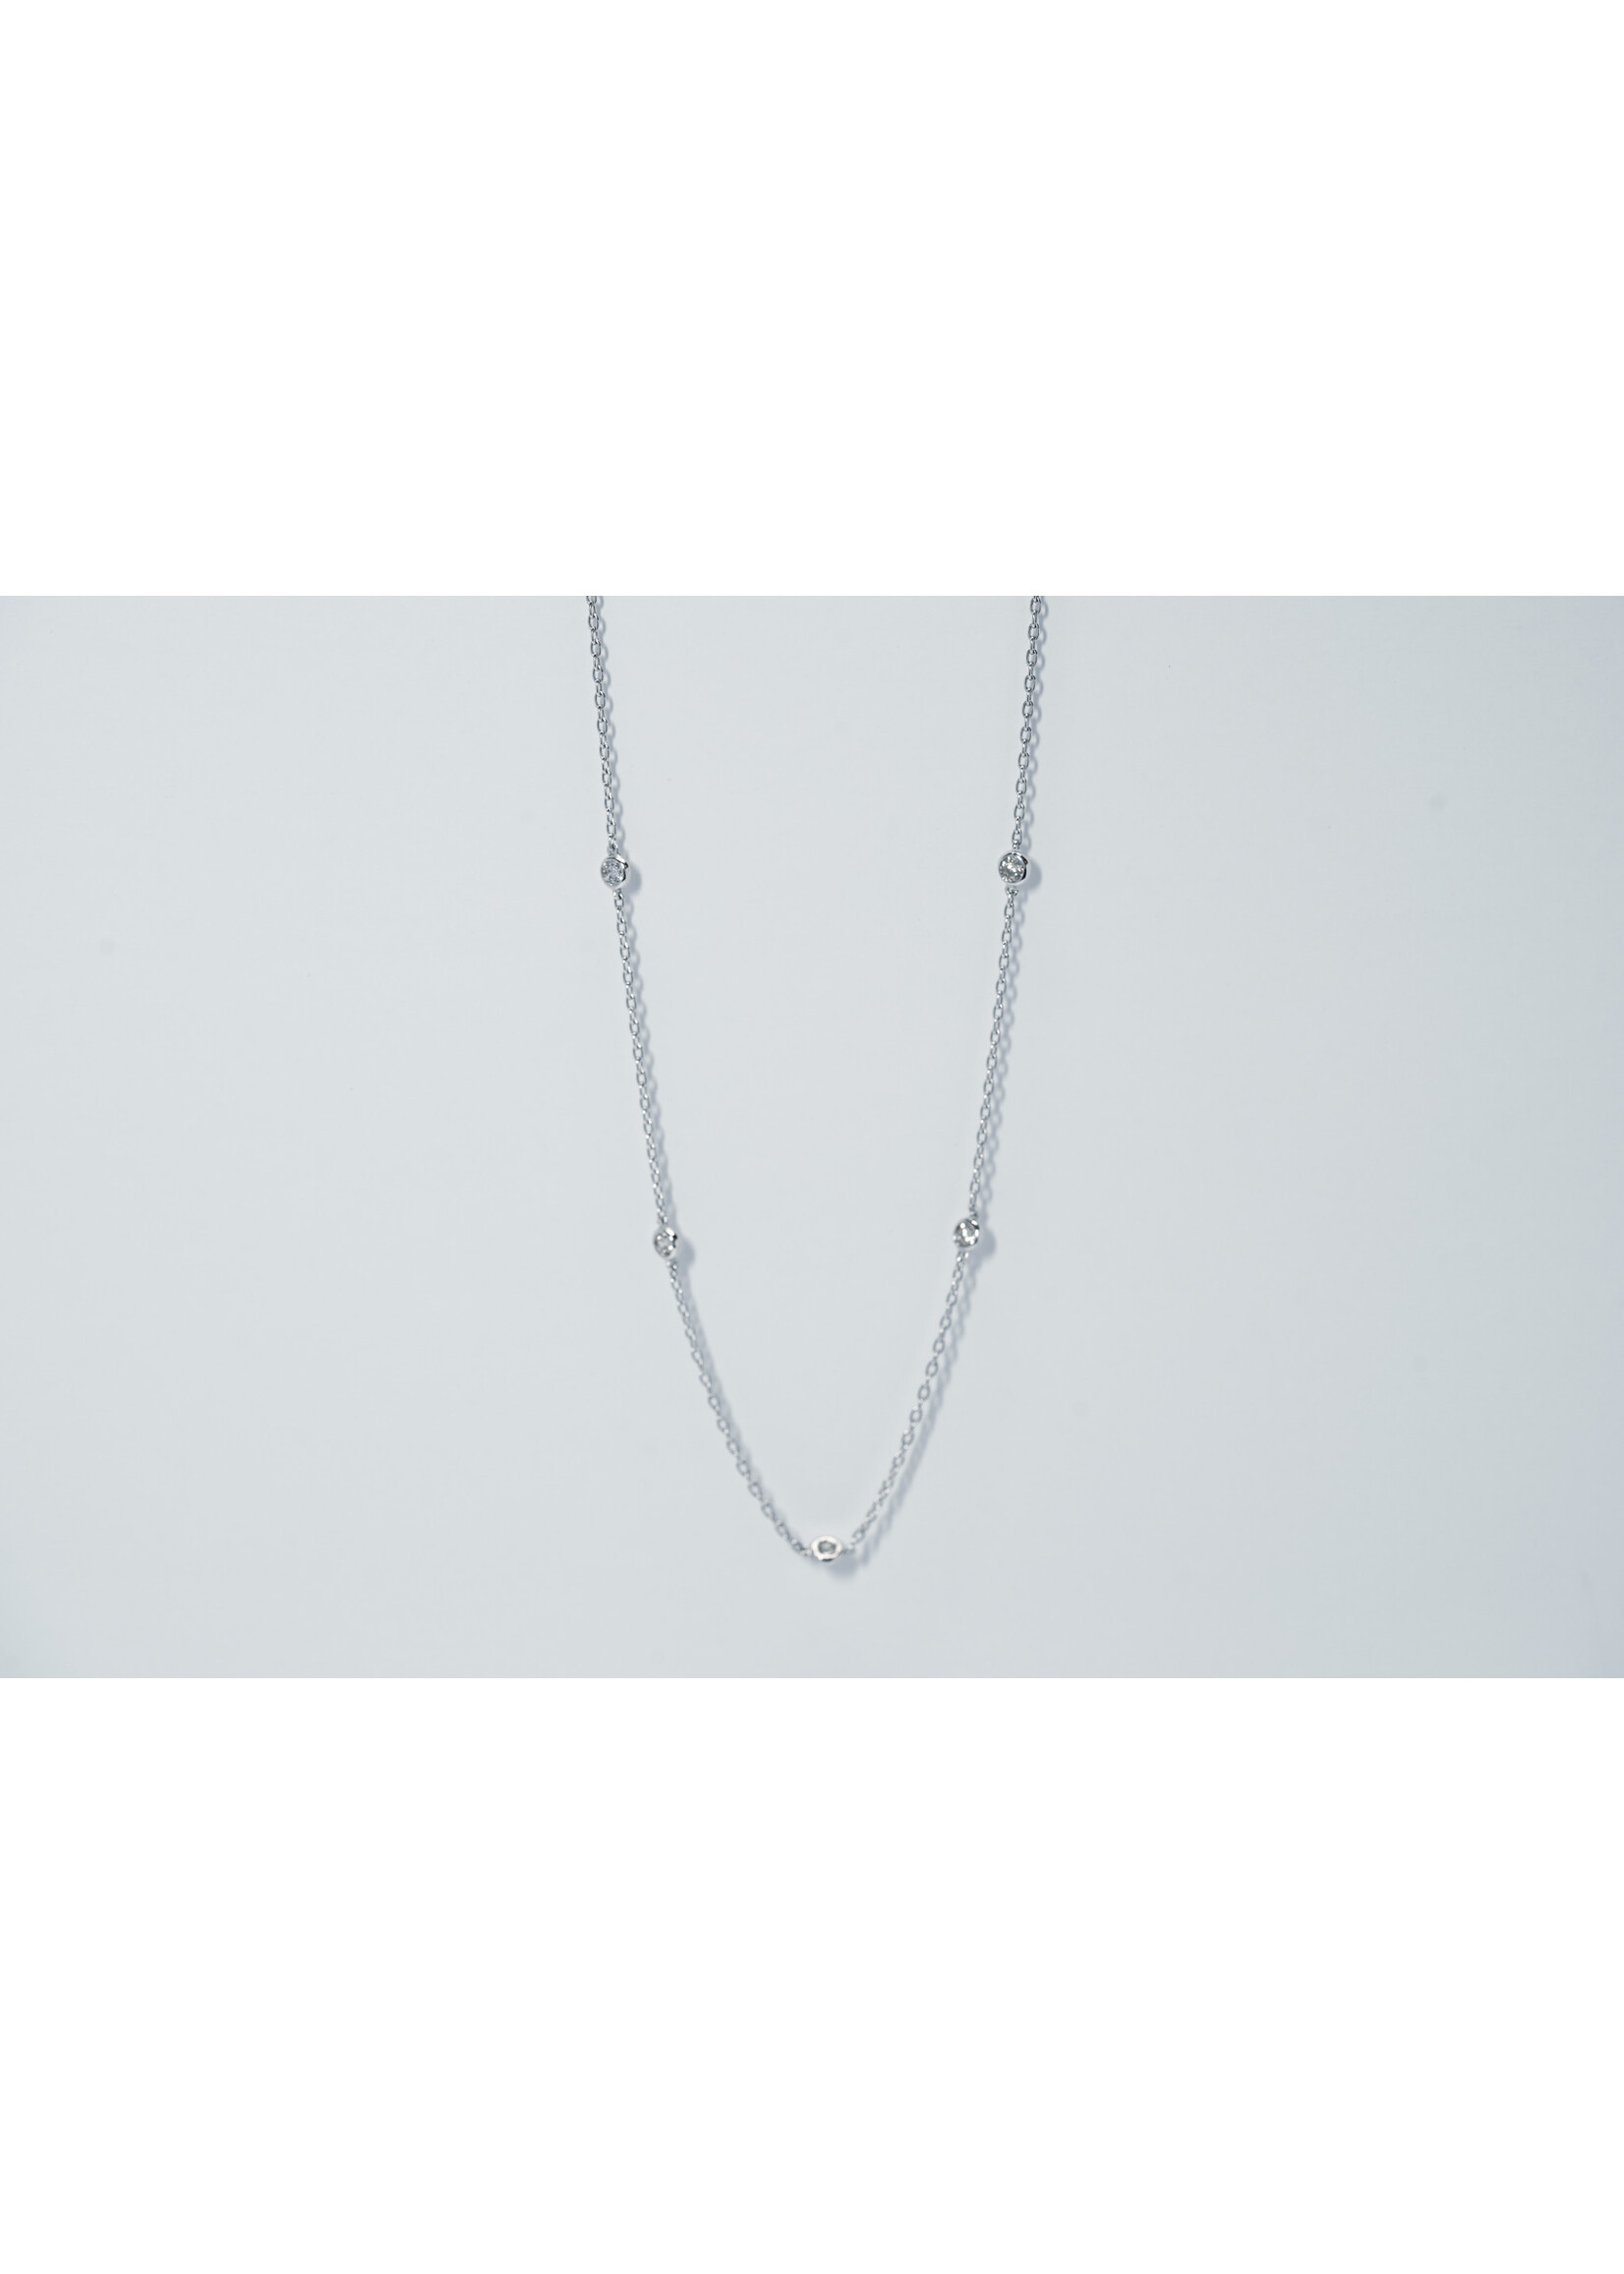 14KW 3.05g .58ctw Diamond By The Yard Necklace 16-18"